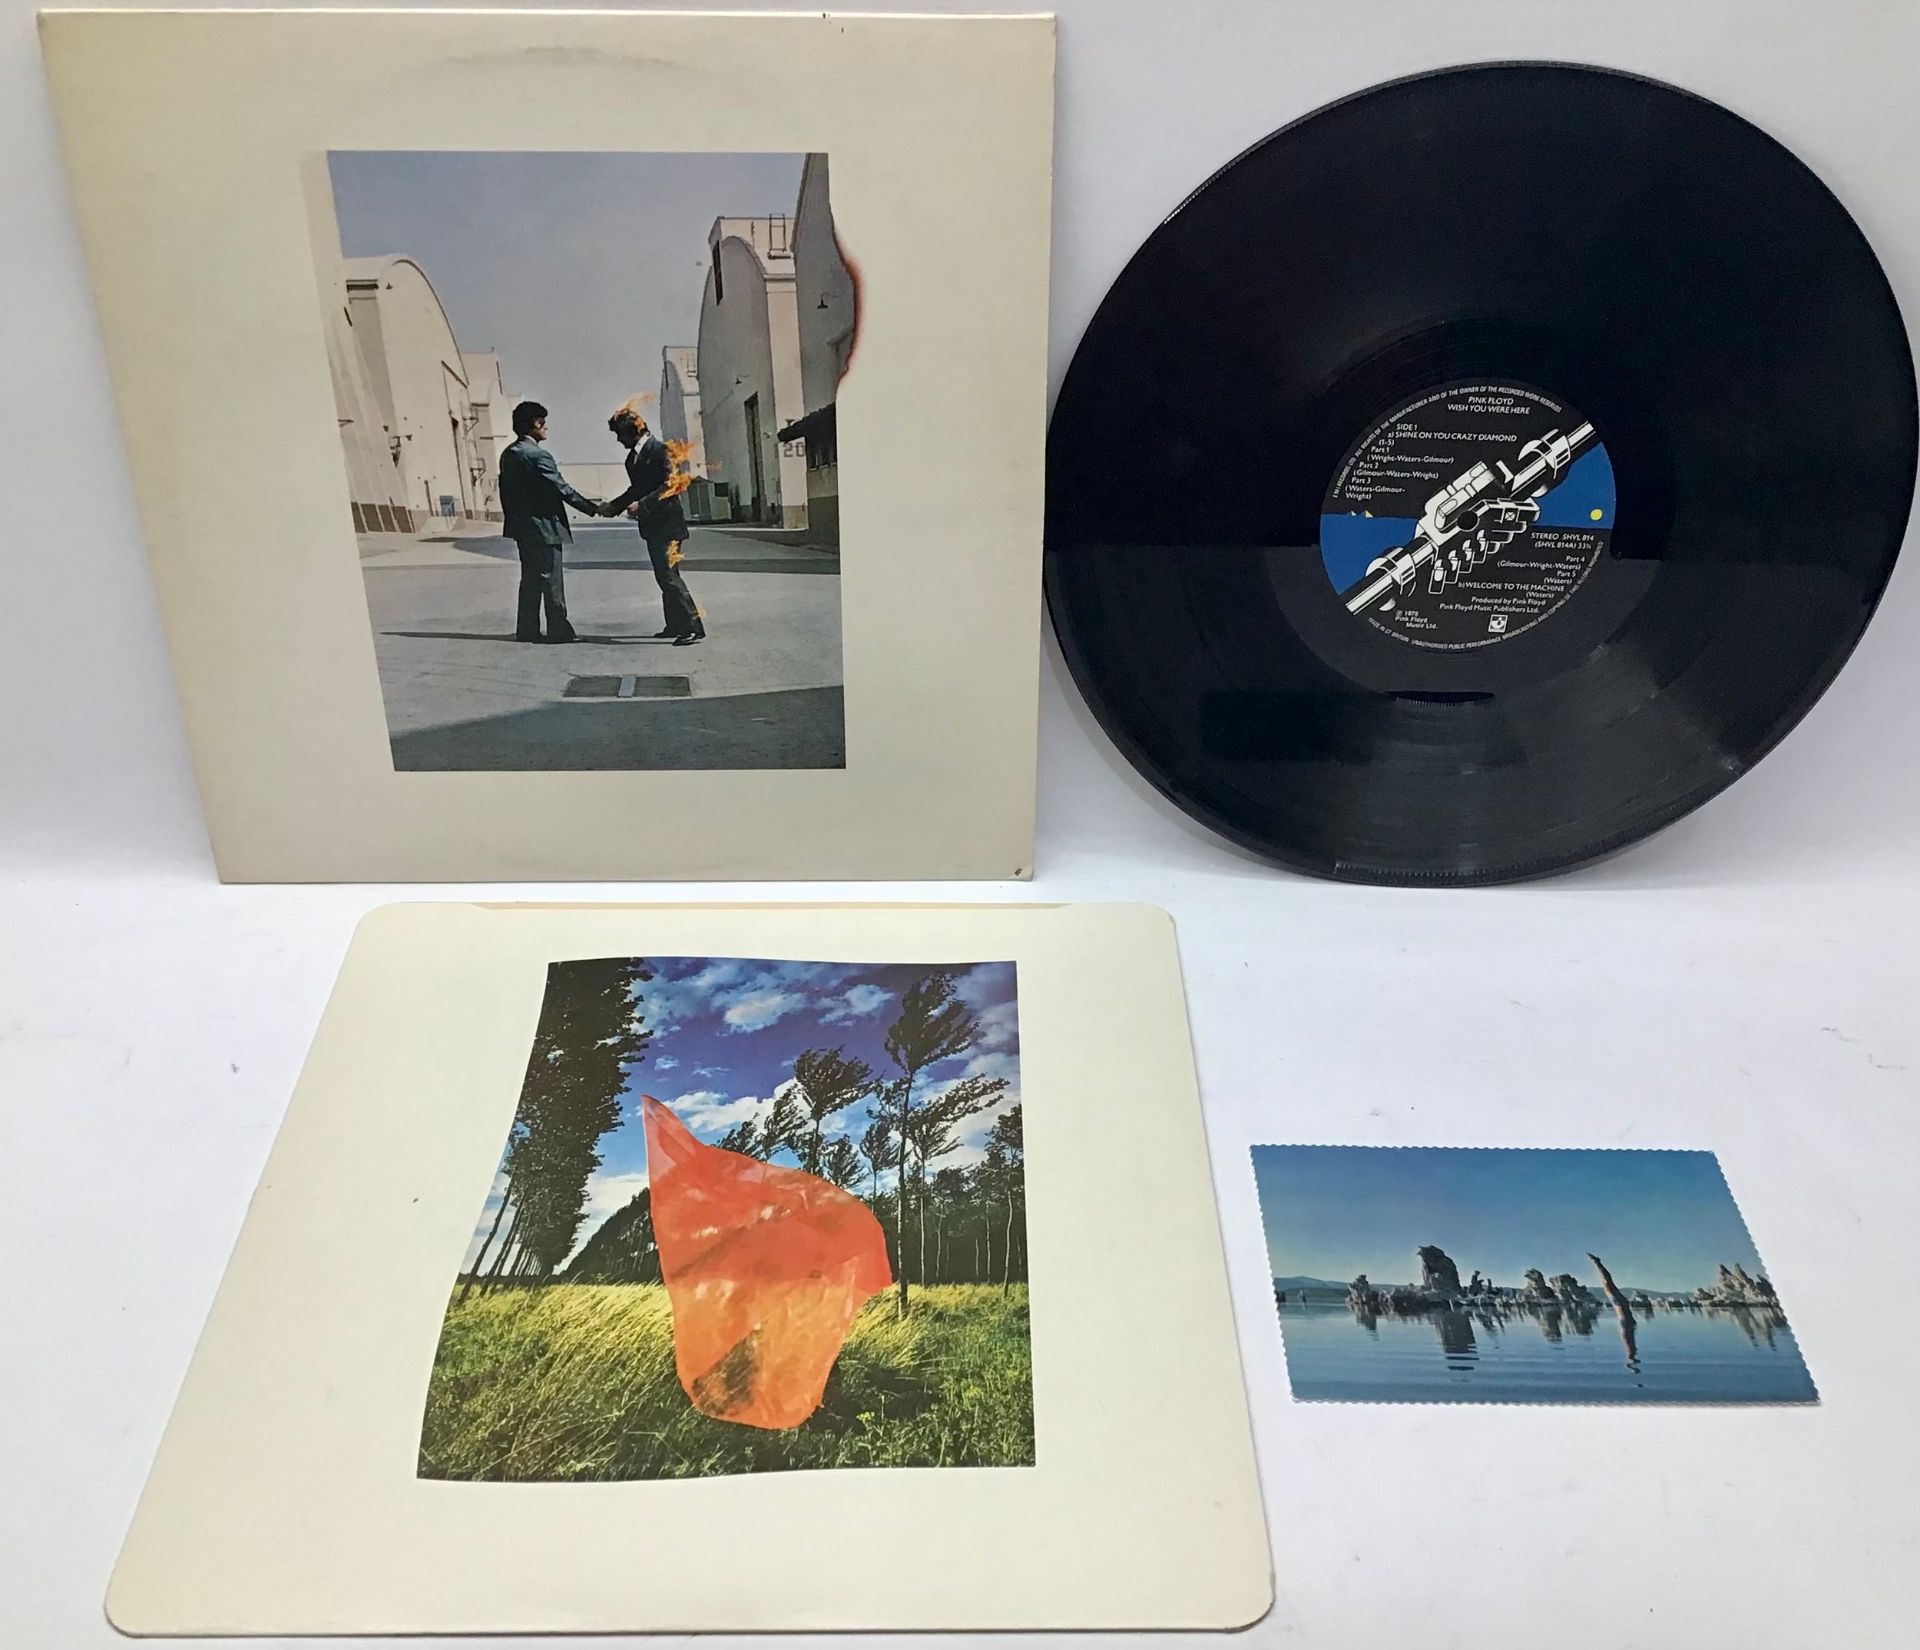 NICE COPY OF PINK FLOYD’S ‘WISH YOU WERE HERE’. This album is on Harvest SHVL 814 from 1975 and